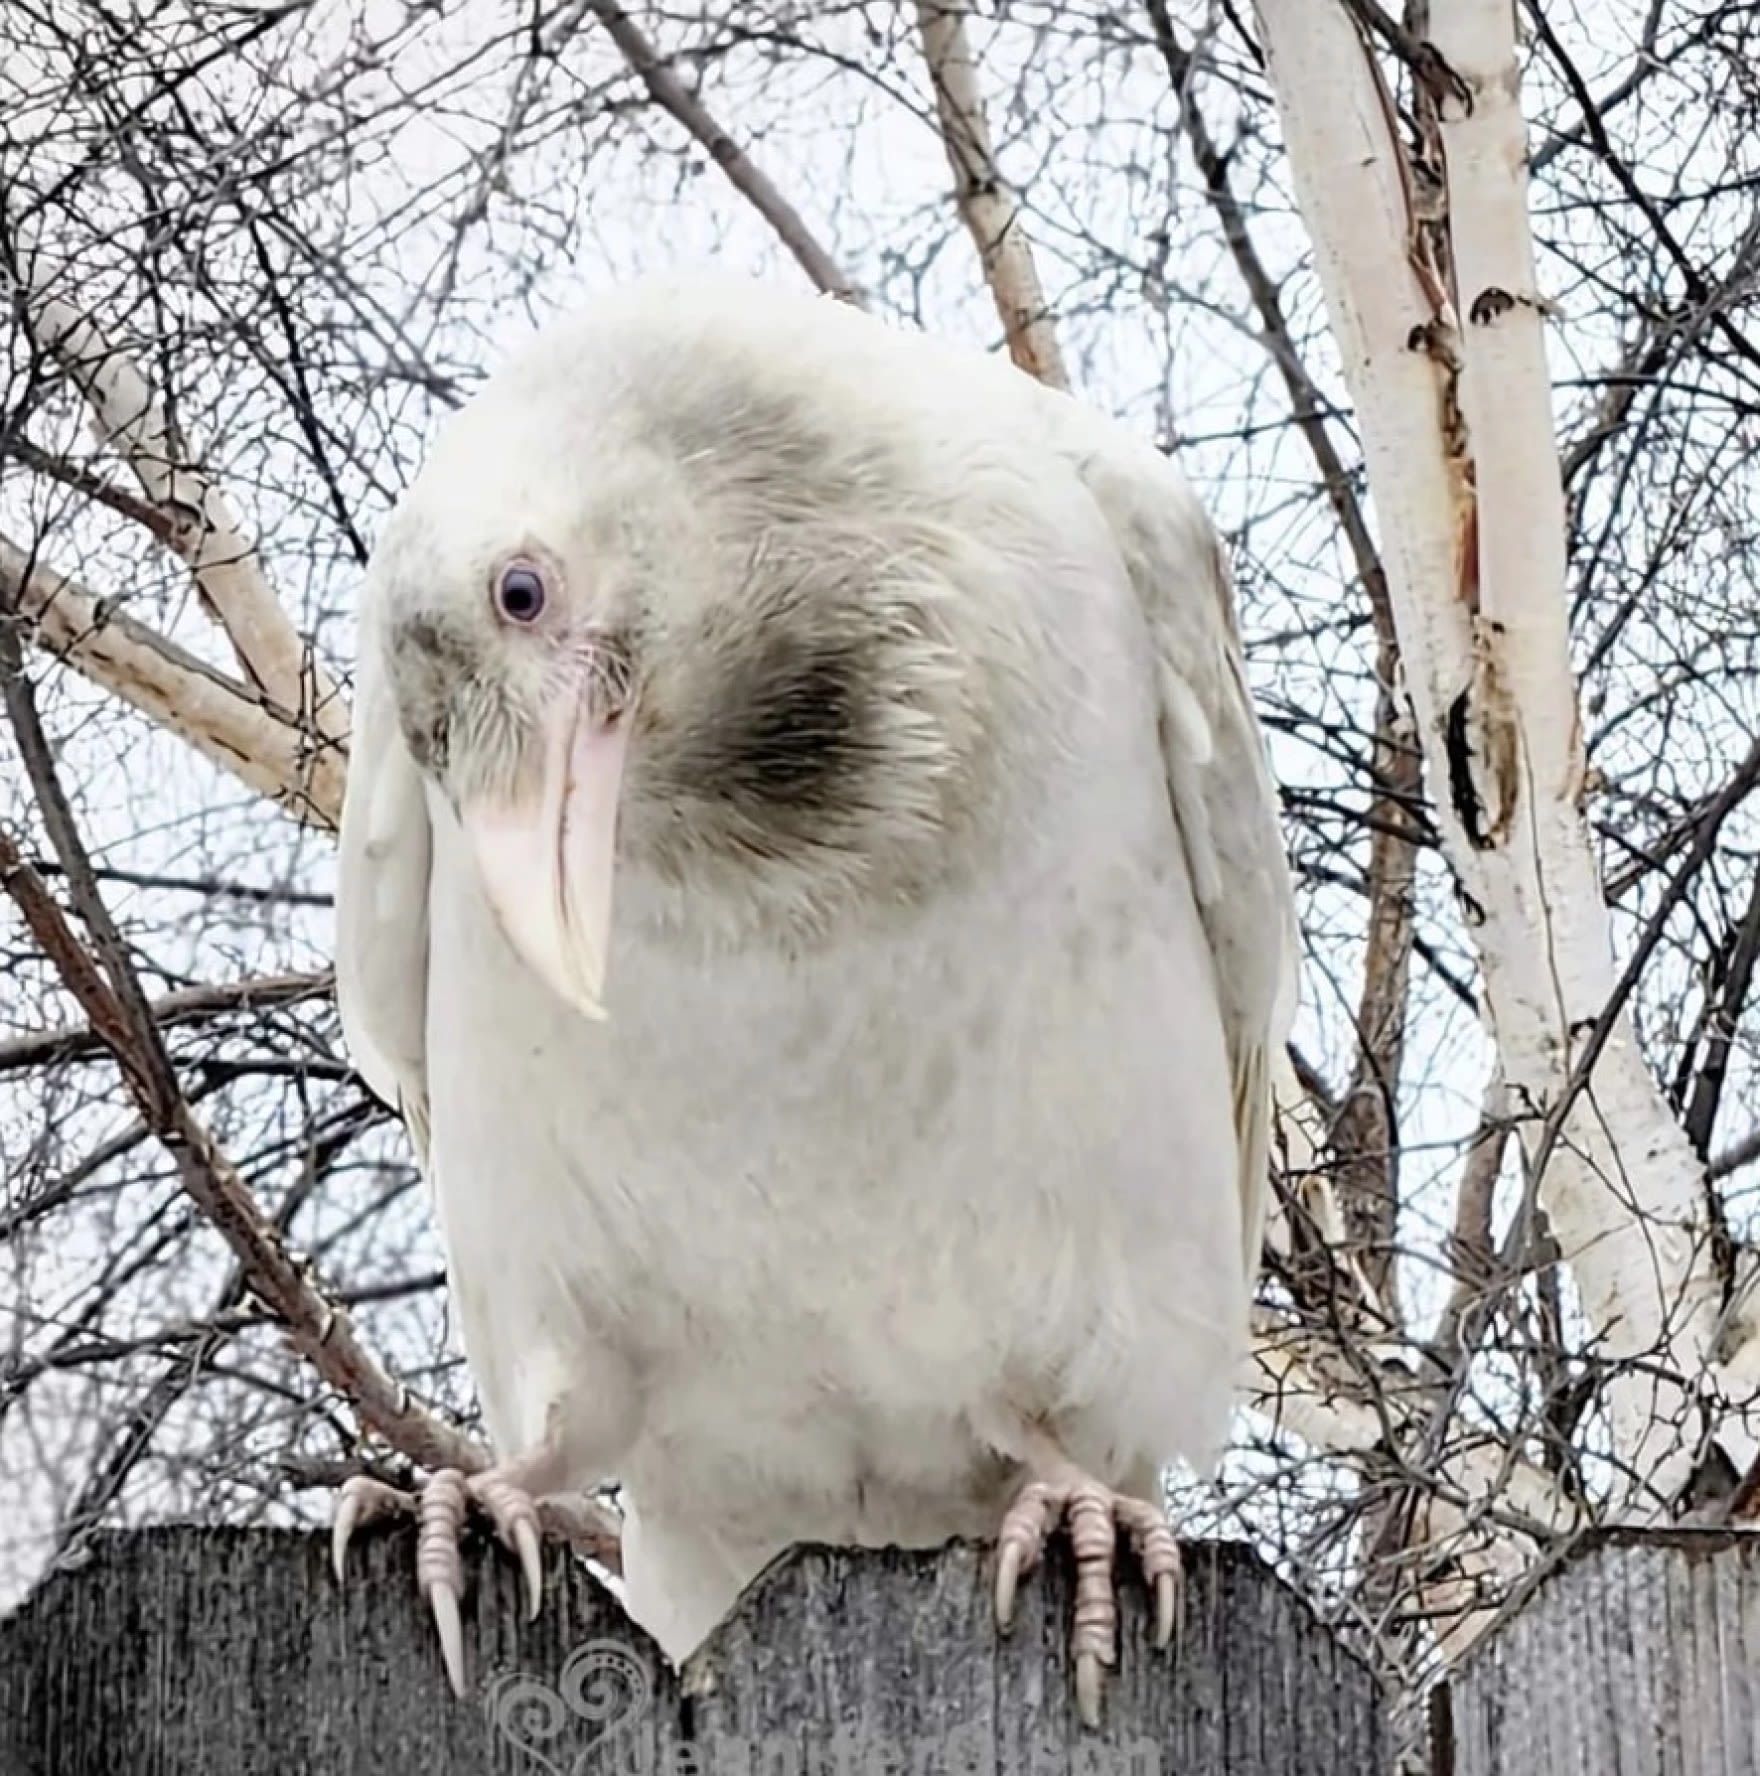 After winter of wonder, Anchorage's white raven takes flight